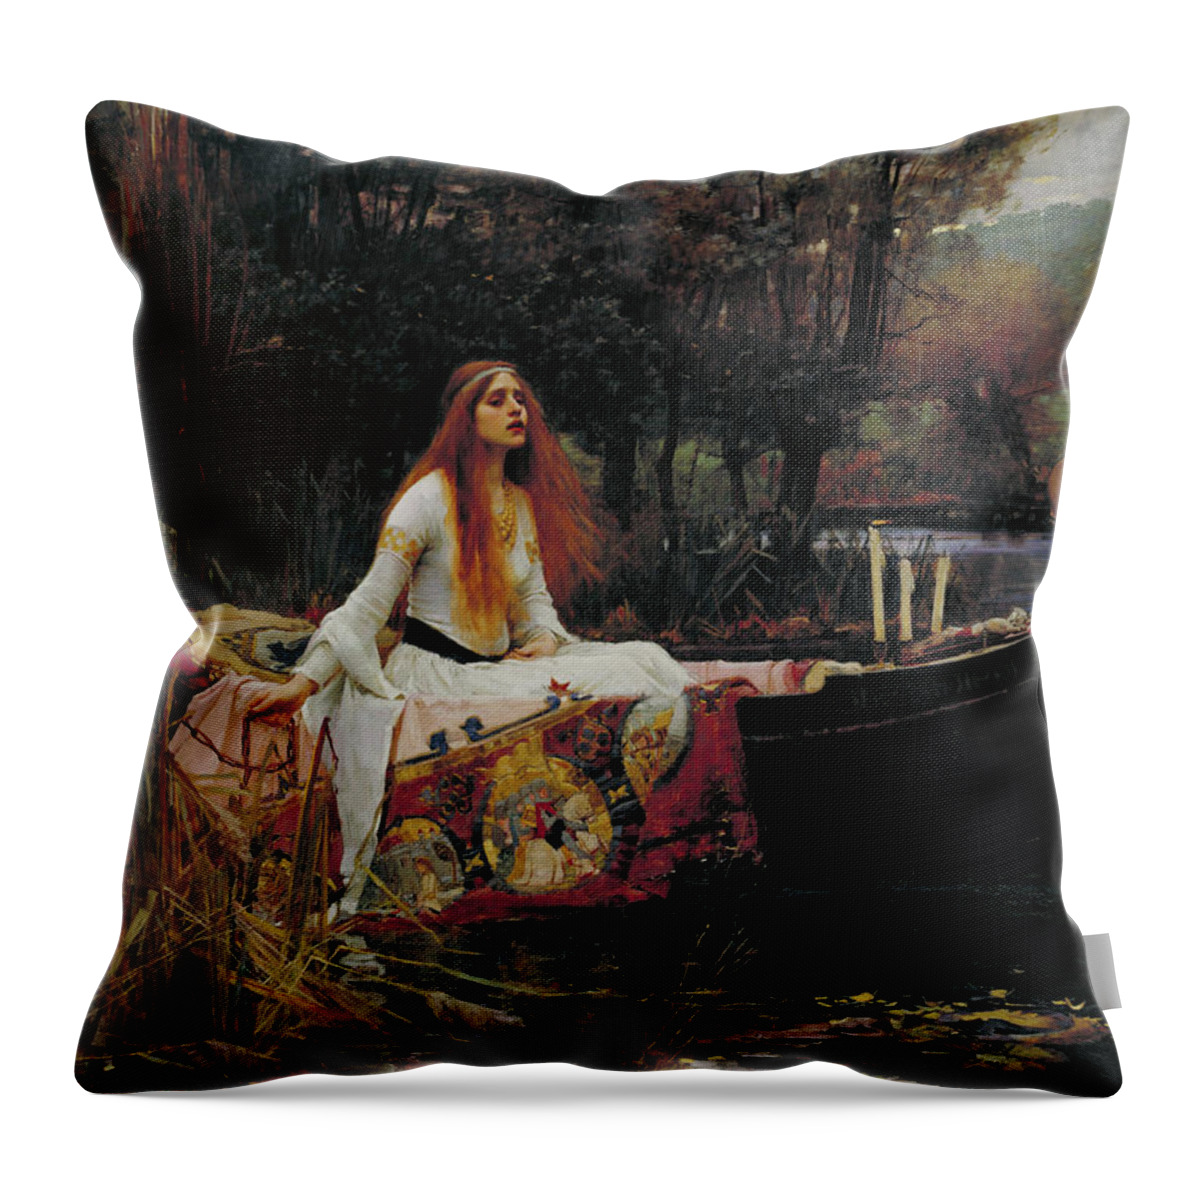 Lady Throw Pillow featuring the painting The Lady of Shalot by John William Waterhouse